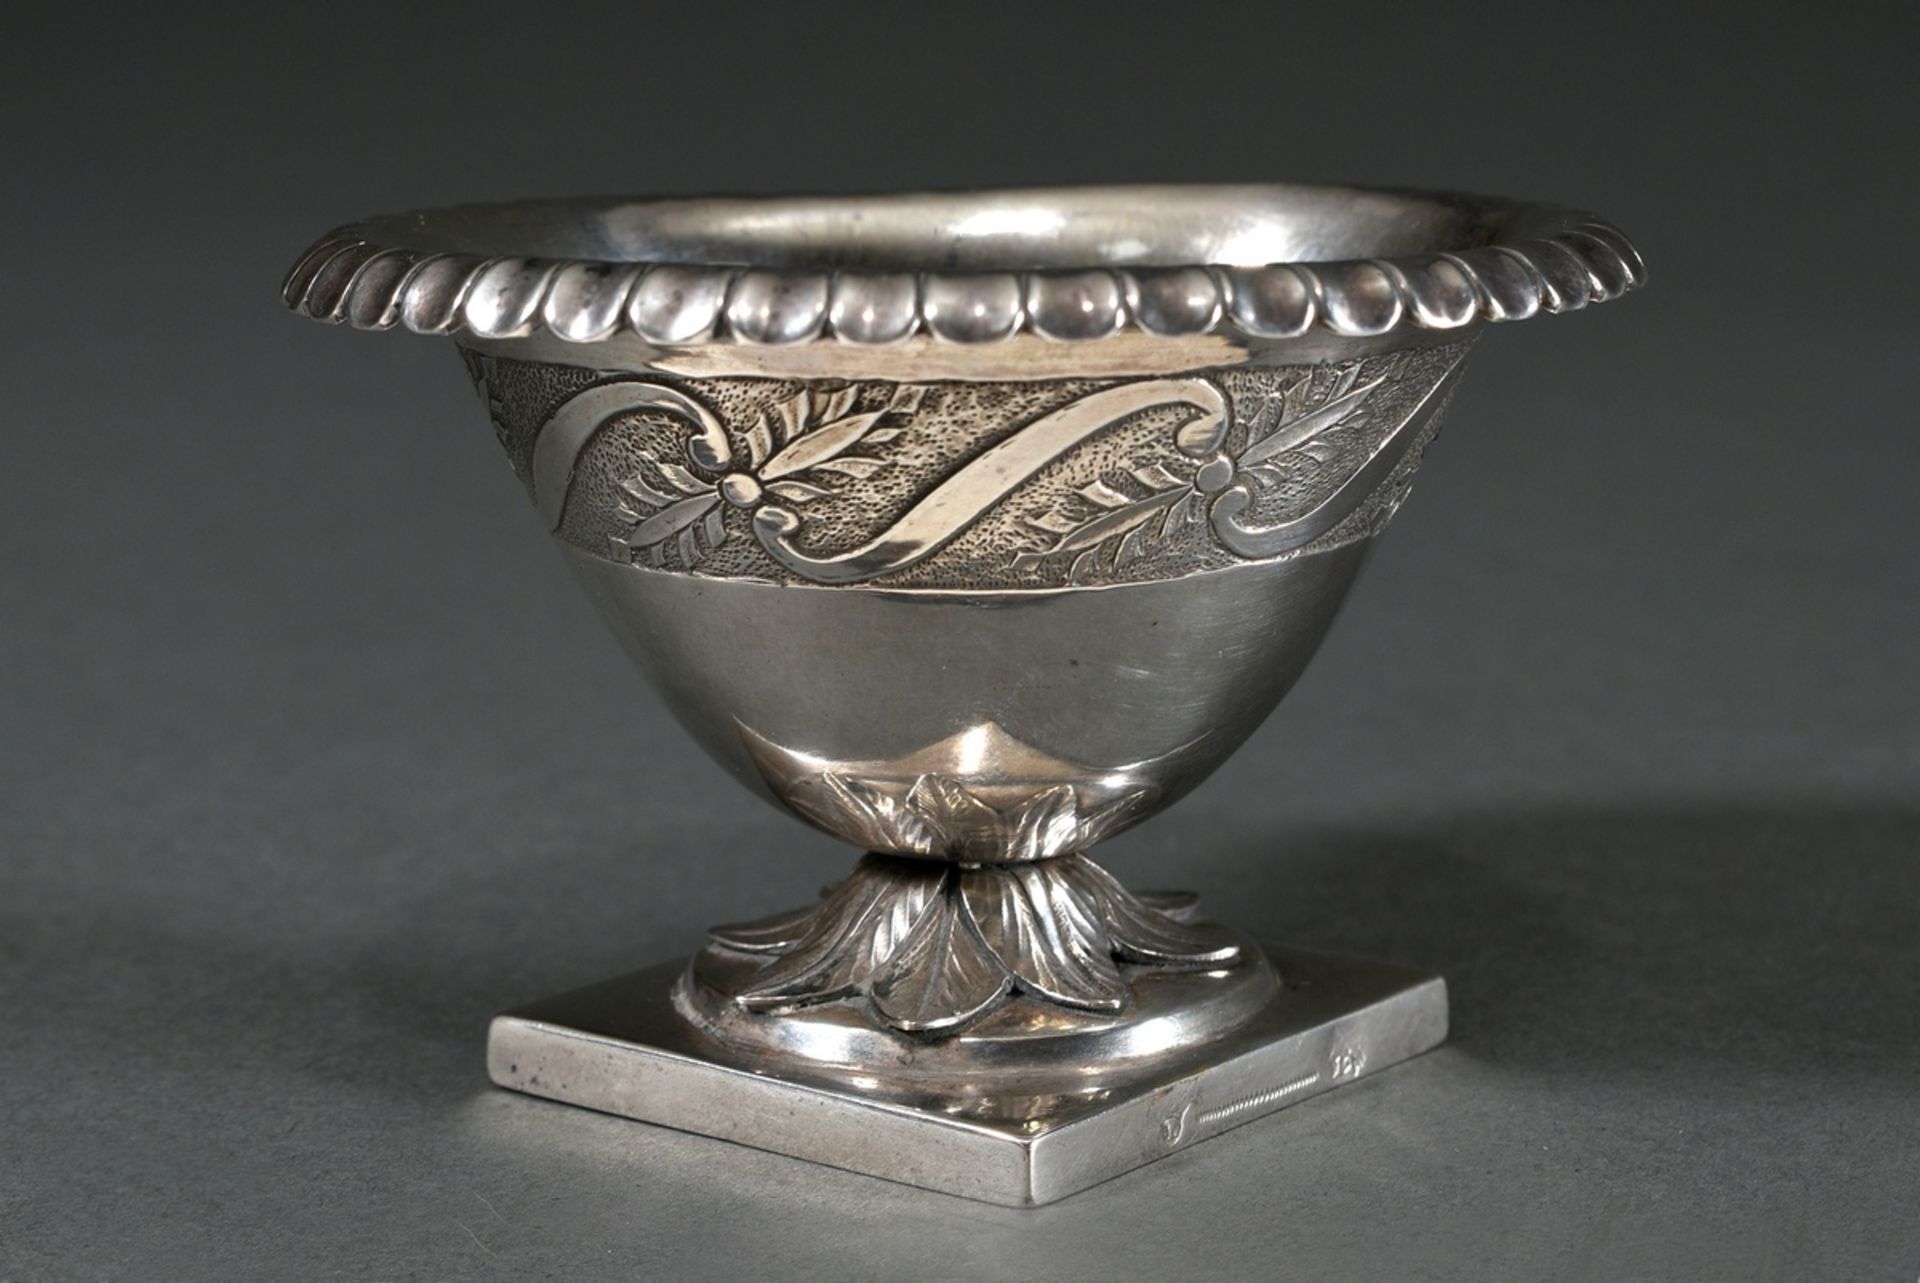 Empire salver of oval form on a diamond-shaped base with sculpted foliate rim and ornamental frieze